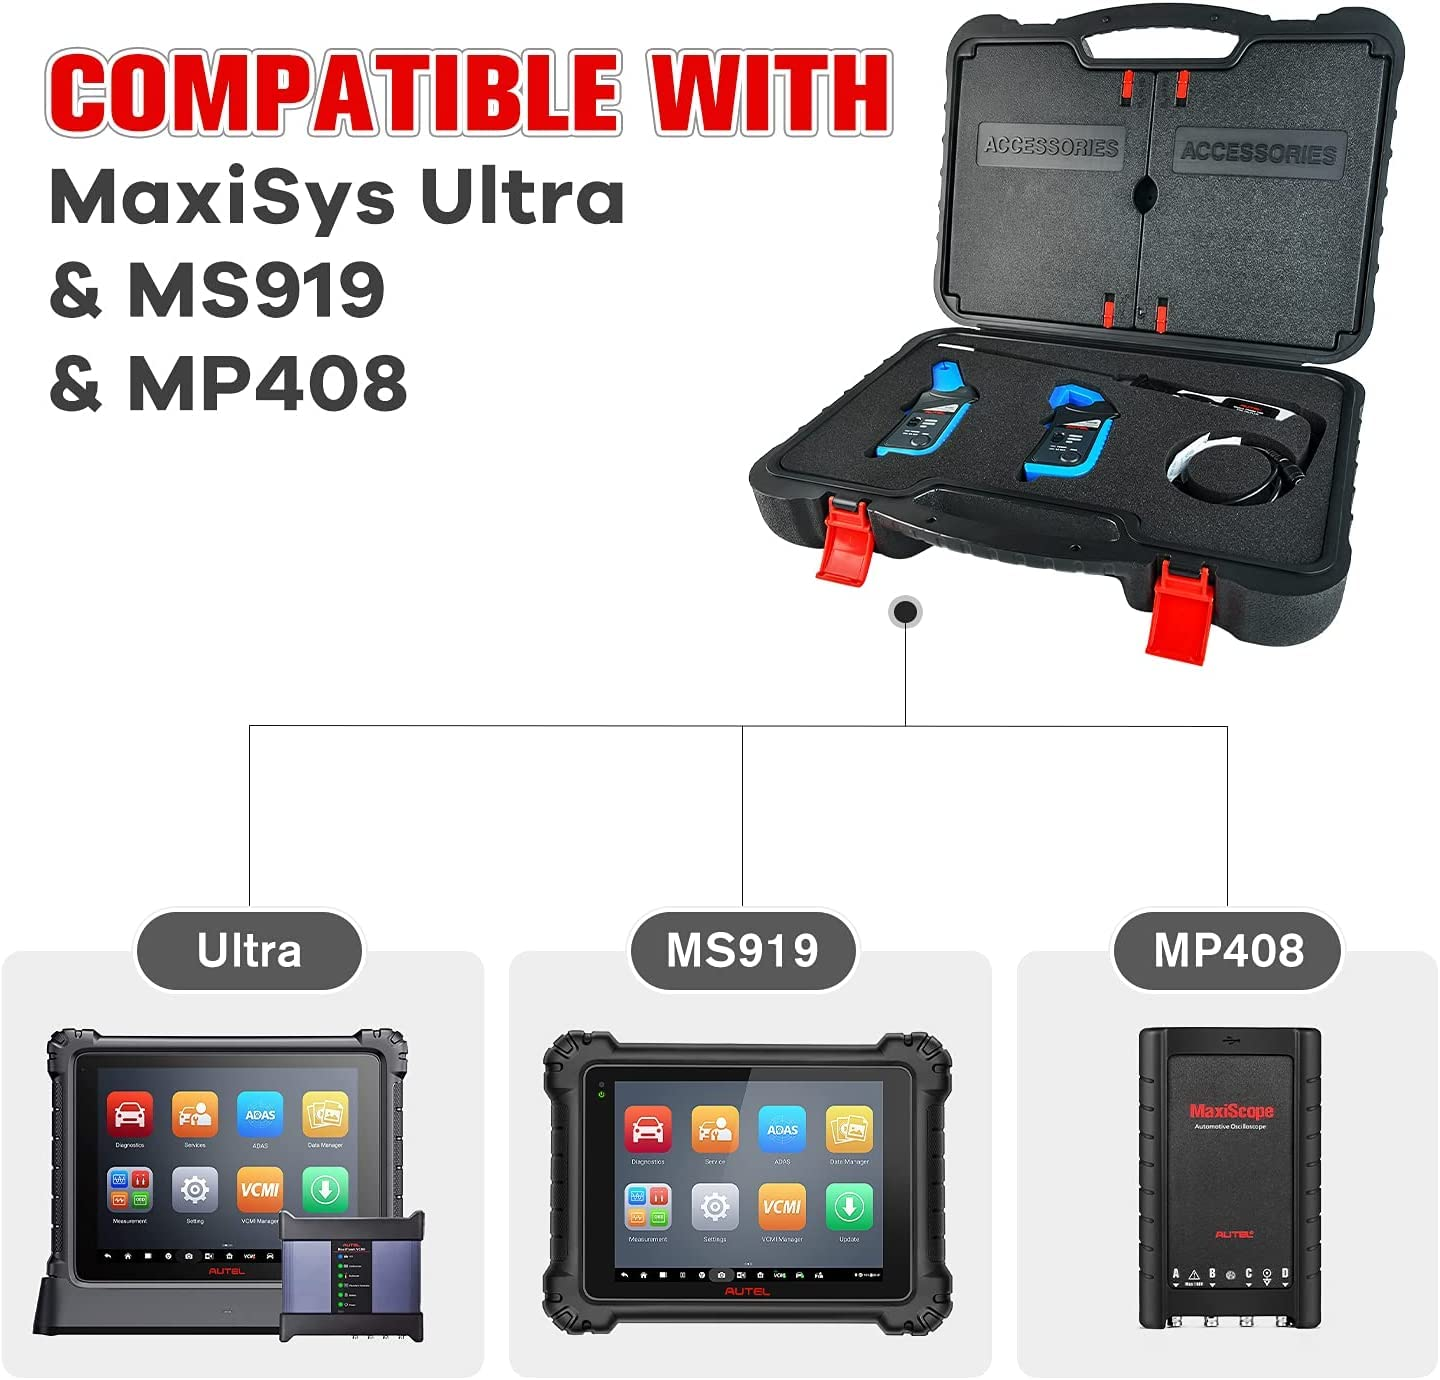 MSOAK is compatible with Maxisys ultra ms919 mp408